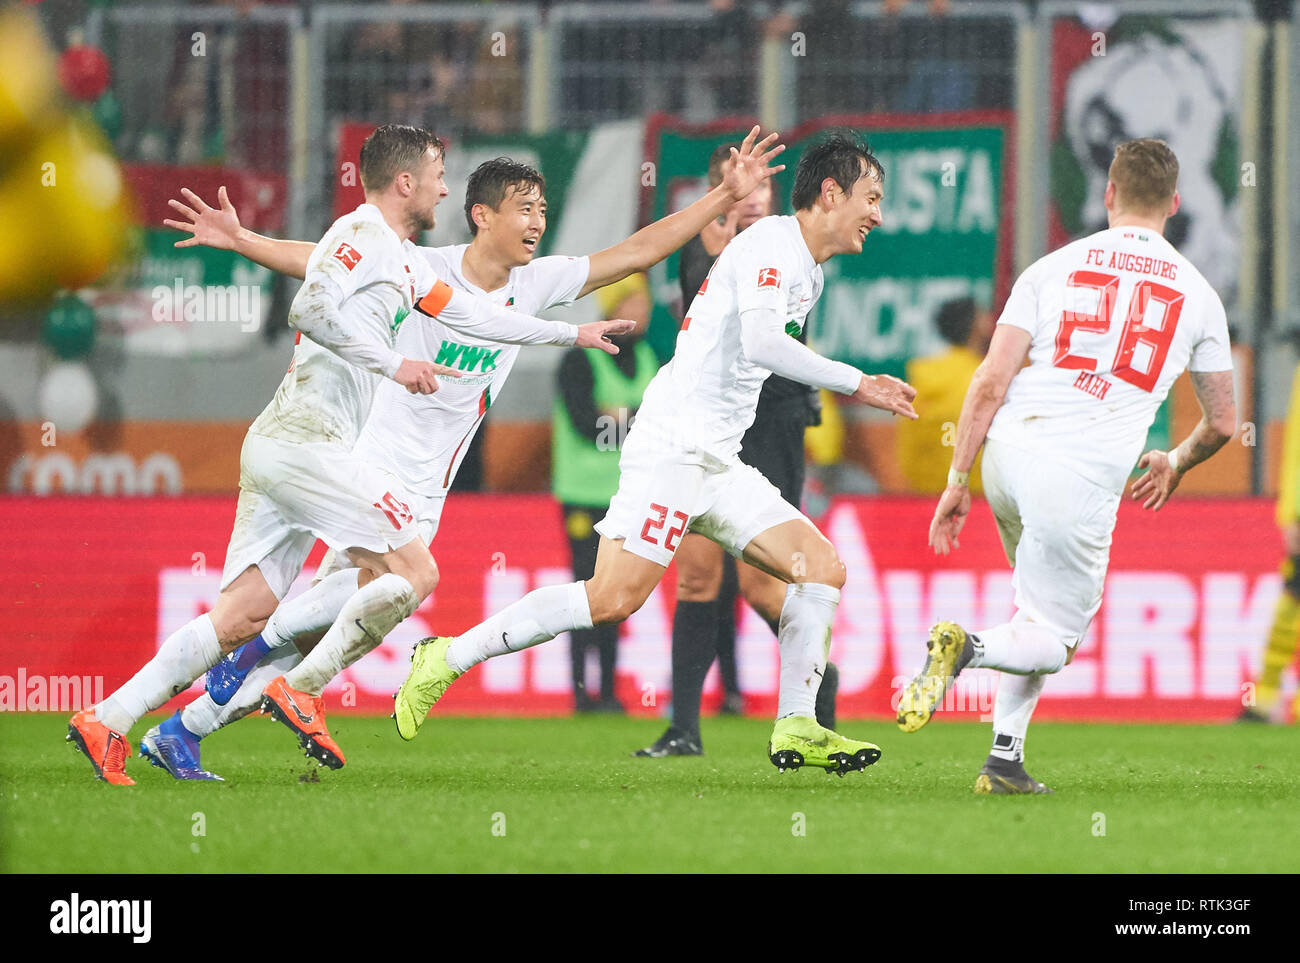 Augsburg, Germany. 01st Mar, 2019. Dong-Won JI, FCA 22 shoot goal for 2-0 celebrates his goal for, happy, laugh, celebration, FC AUGSBURG - BORUSSIA DORTMUND - DFL REGULATIONS PROHIBIT ANY USE OF PHOTOGRAPHS as IMAGE SEQUENCES and/or QUASI-VIDEO - 1.German Soccer League, Augsburg, March 1, 2019 Season 2018/2019, matchday 24, BVB, Bavaria Credit: Peter Schatz/Alamy Live News Stock Photo